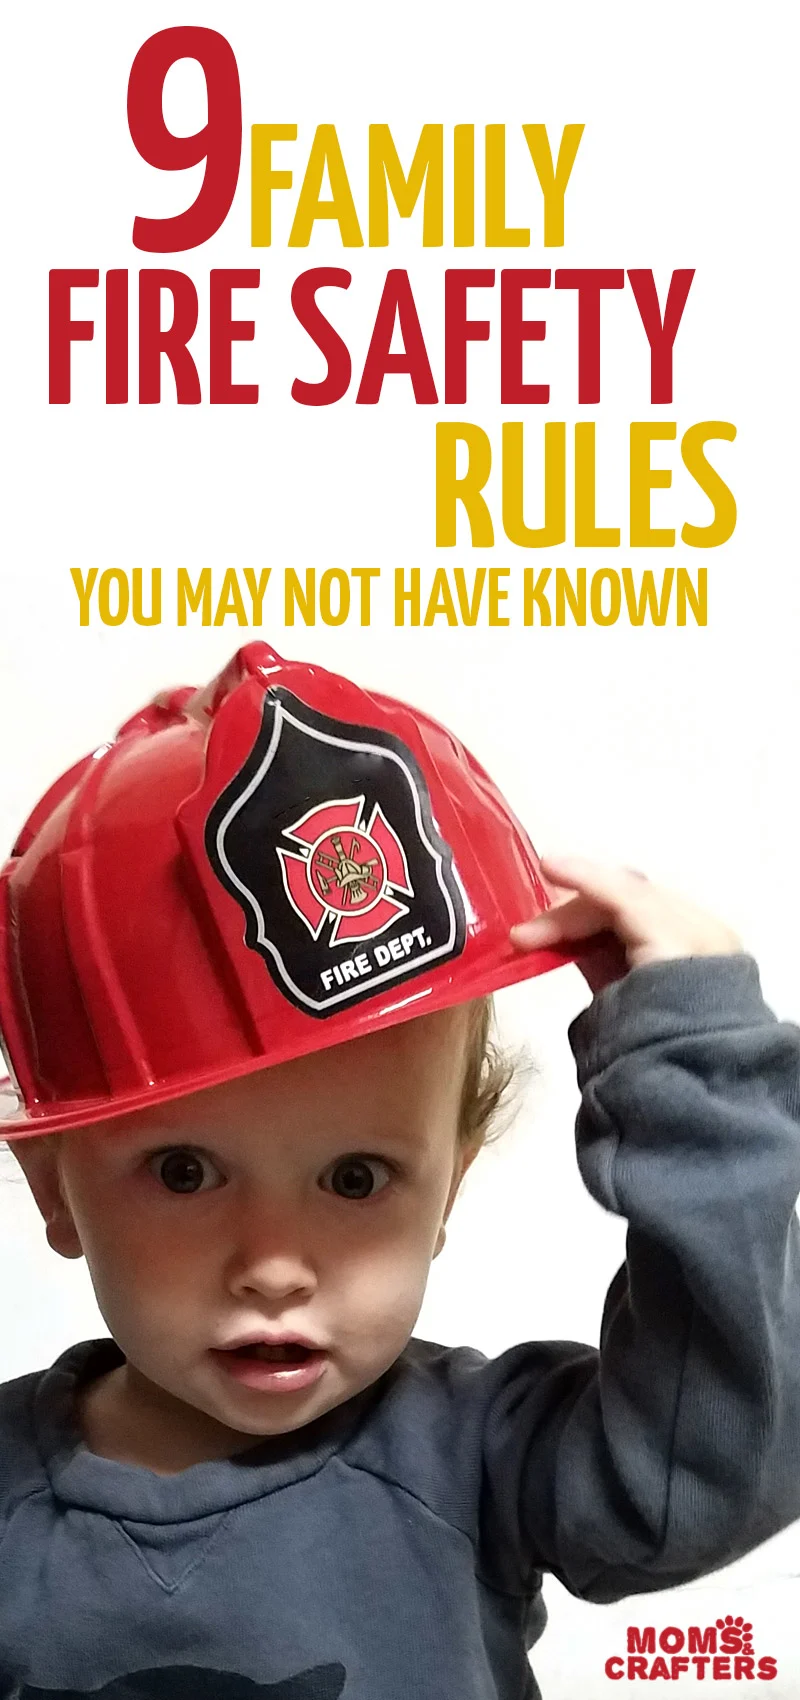 These family fire safety rules are essential parenting tips, every mom should read! #SuperPreparedFamily #momhacks #momtips #parenting